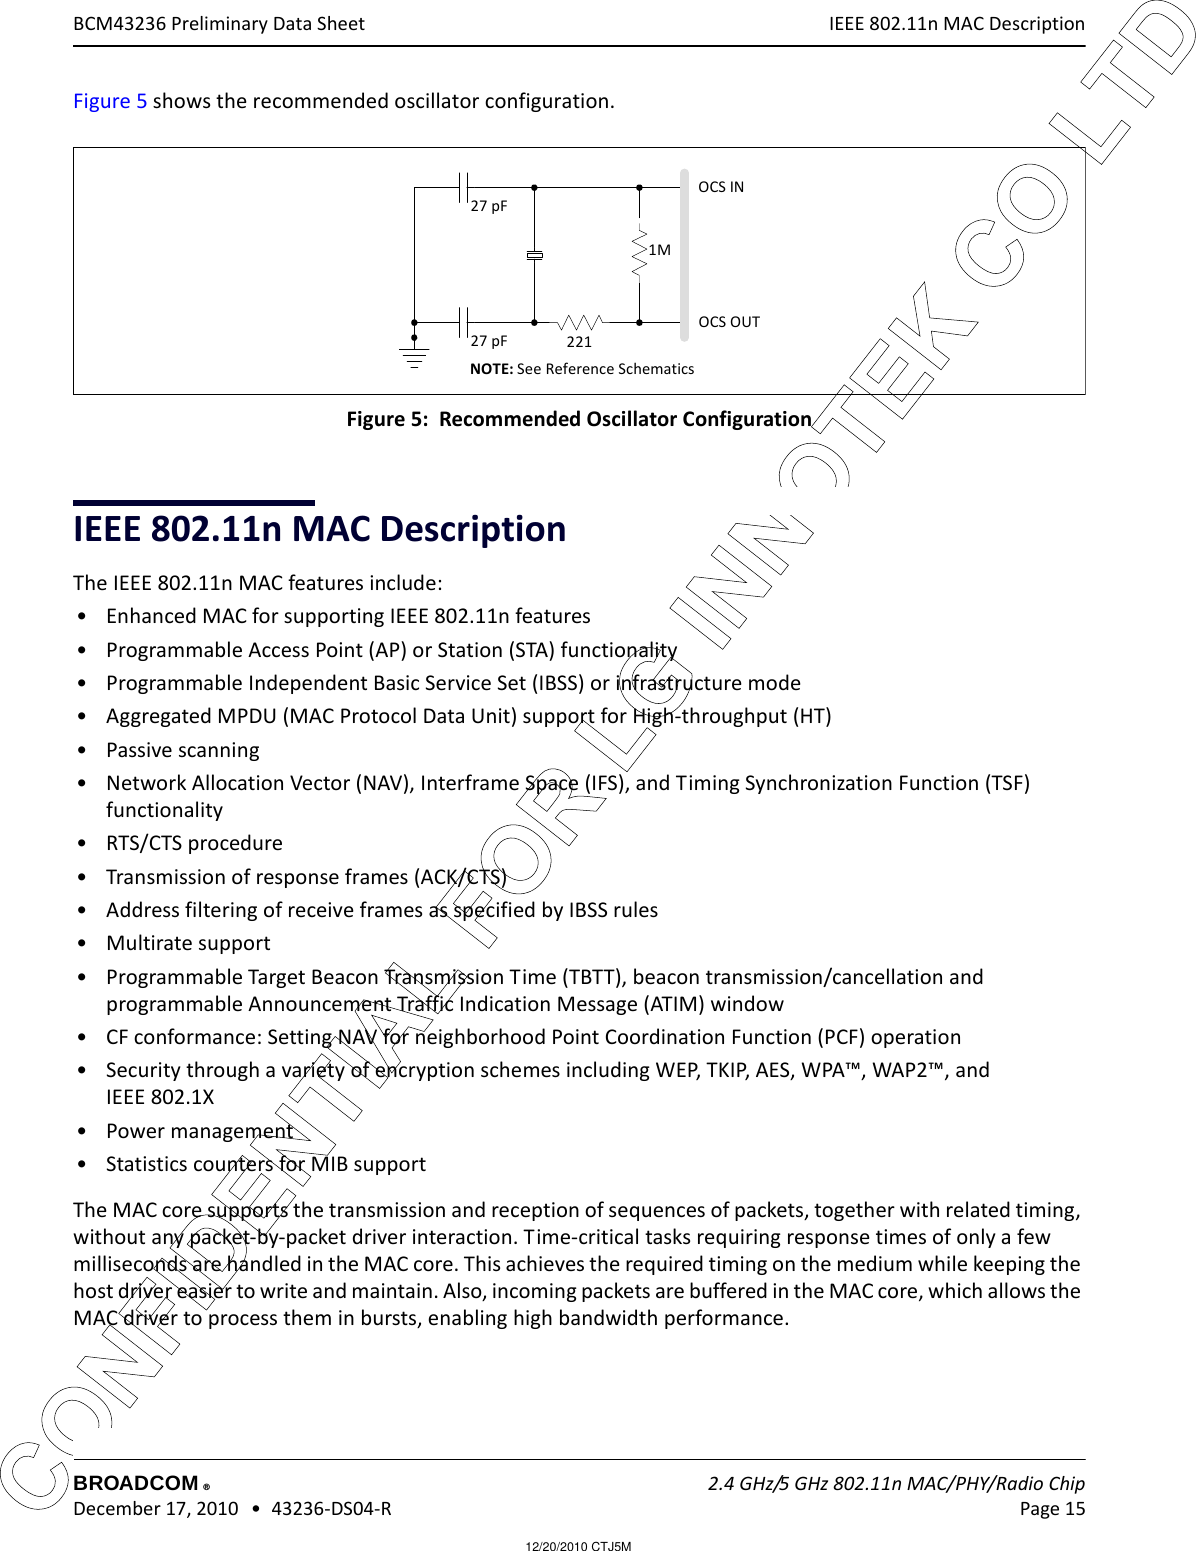 12/20/2010 CTJ5MCONFIDENTIAL FOR LG INNOTEK CO LTD IEEE 802.11n MAC DescriptionBROADCOM    2.4 GHz/5 GHz 802.11n MAC/PHY/Radio Chip December 17, 2010   •  43236-DS04-R Page 15®BCM43236 Preliminary Data SheetFigure 5 shows the recommended oscillator configuration.  Figure 5:  Recommended Oscillator ConfigurationIEEE 802.11n MAC DescriptionThe IEEE 802.11n MAC features include:• Enhanced MAC for supporting IEEE 802.11n features• Programmable Access Point (AP) or Station (STA) functionality• Programmable Independent Basic Service Set (IBSS) or infrastructure mode• Aggregated MPDU (MAC Protocol Data Unit) support for High-throughput (HT)• Passive scanning• Network Allocation Vector (NAV), Interframe Space (IFS), and Timing Synchronization Function (TSF) functionality• RTS/CTS procedure• Transmission of response frames (ACK/CTS)• Address filtering of receive frames as specified by IBSS rules• Multirate support• Programmable Target Beacon Transmission Time (TBTT), beacon transmission/cancellation and programmable Announcement Traffic Indication Message (ATIM) window• CF conformance: Setting NAV for neighborhood Point Coordination Function (PCF) operation• Security through a variety of encryption schemes including WEP, TKIP, AES, WPA™, WAP2™, and IEEE 802.1X• Power management• Statistics counters for MIB supportThe MAC core supports the transmission and reception of sequences of packets, together with related timing, without any packet-by-packet driver interaction. Time-critical tasks requiring response times of only a few milliseconds are handled in the MAC core. This achieves the required timing on the medium while keeping the host driver easier to write and maintain. Also, incoming packets are buffered in the MAC core, which allows the MAC driver to process them in bursts, enabling high bandwidth performance.1M27 pF27 pF221OCS INOCS OUTNOTE: See Reference Schematics